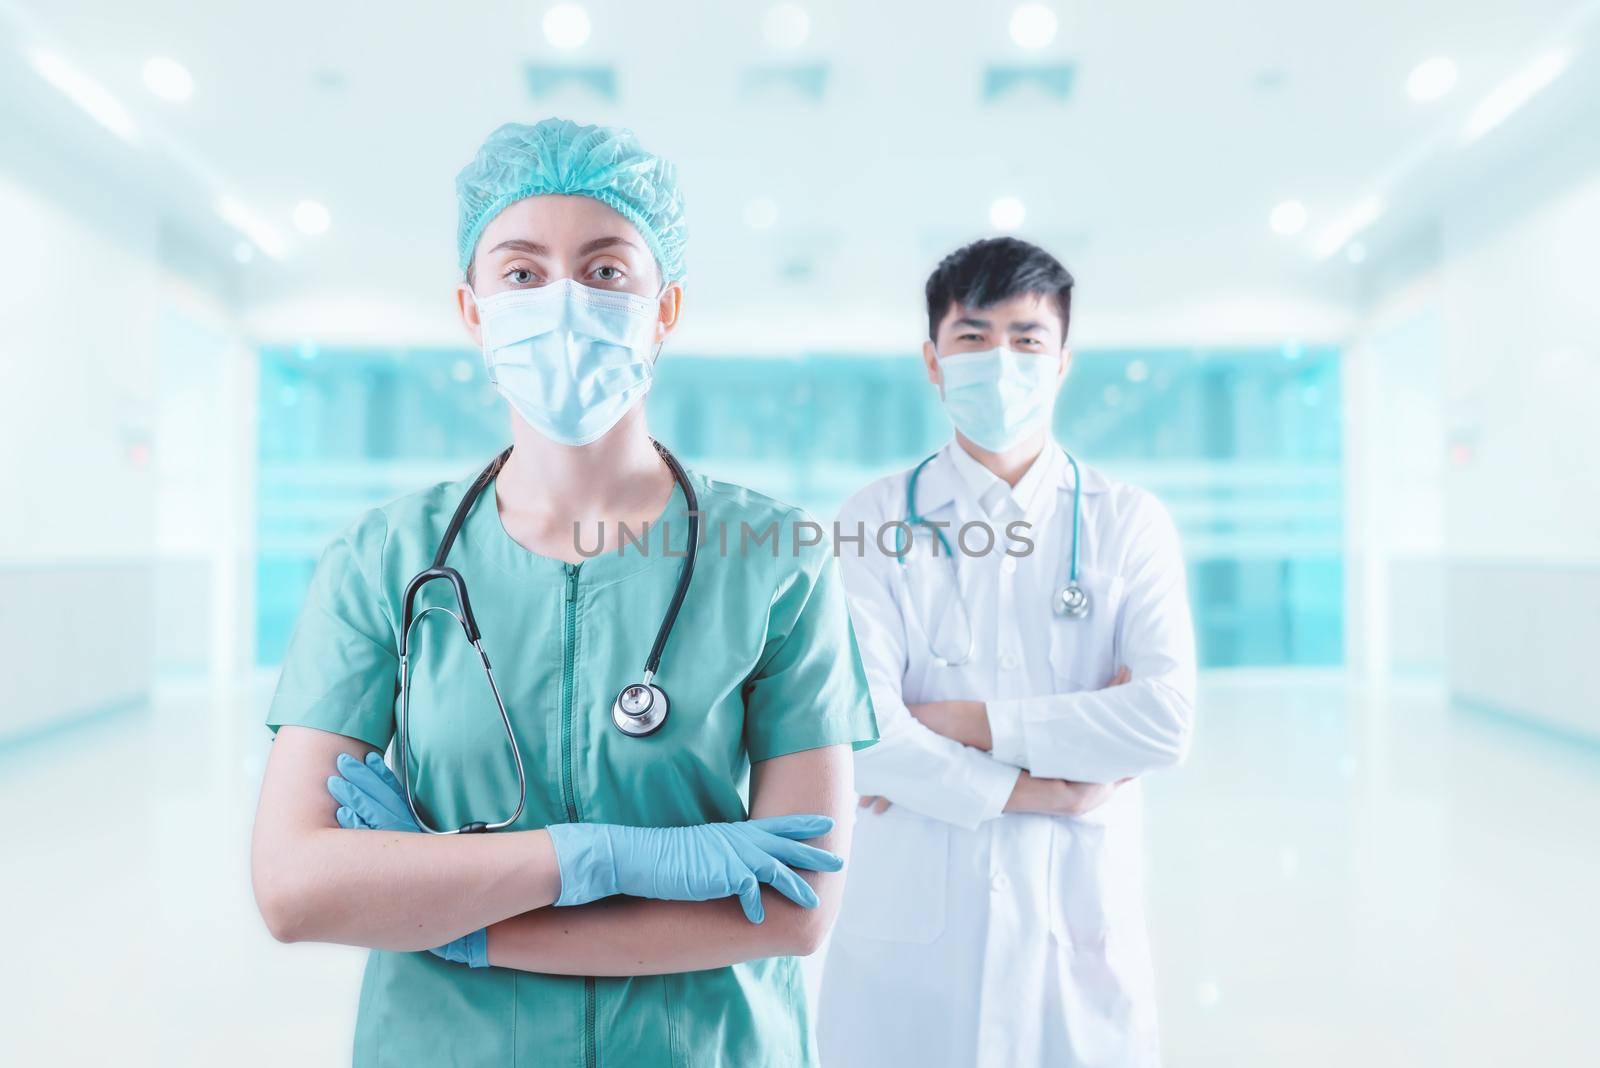 Medical Patient Healthcare and Doctor Occupation Concept, Medicine Physician Doctor Team in Hospital Clinic Health Care. Cardiologist Specialist Doctors Teamwork on Examining Patients Background.